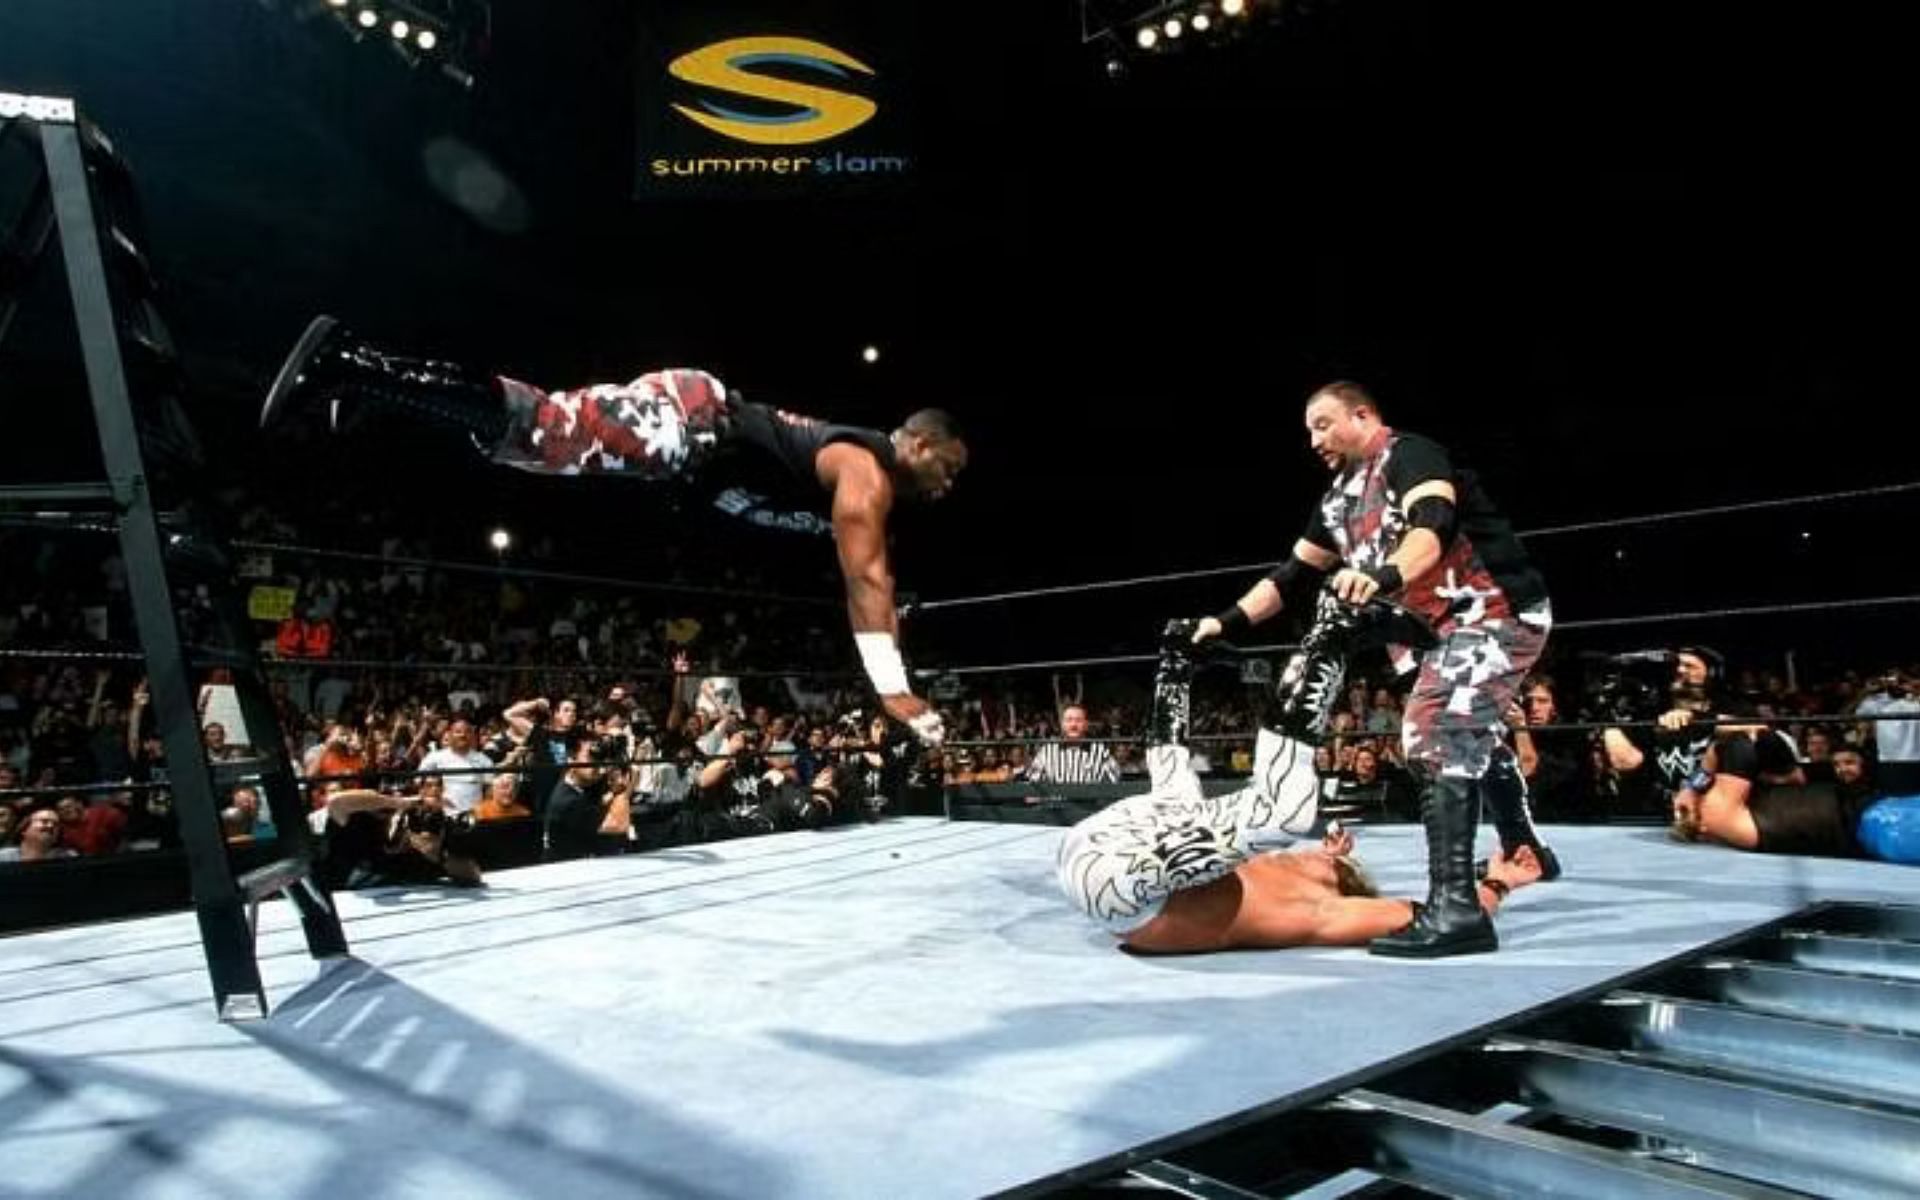 The Dudleys, The Hardys, and Edge &amp; Christian put on a tag team classic!